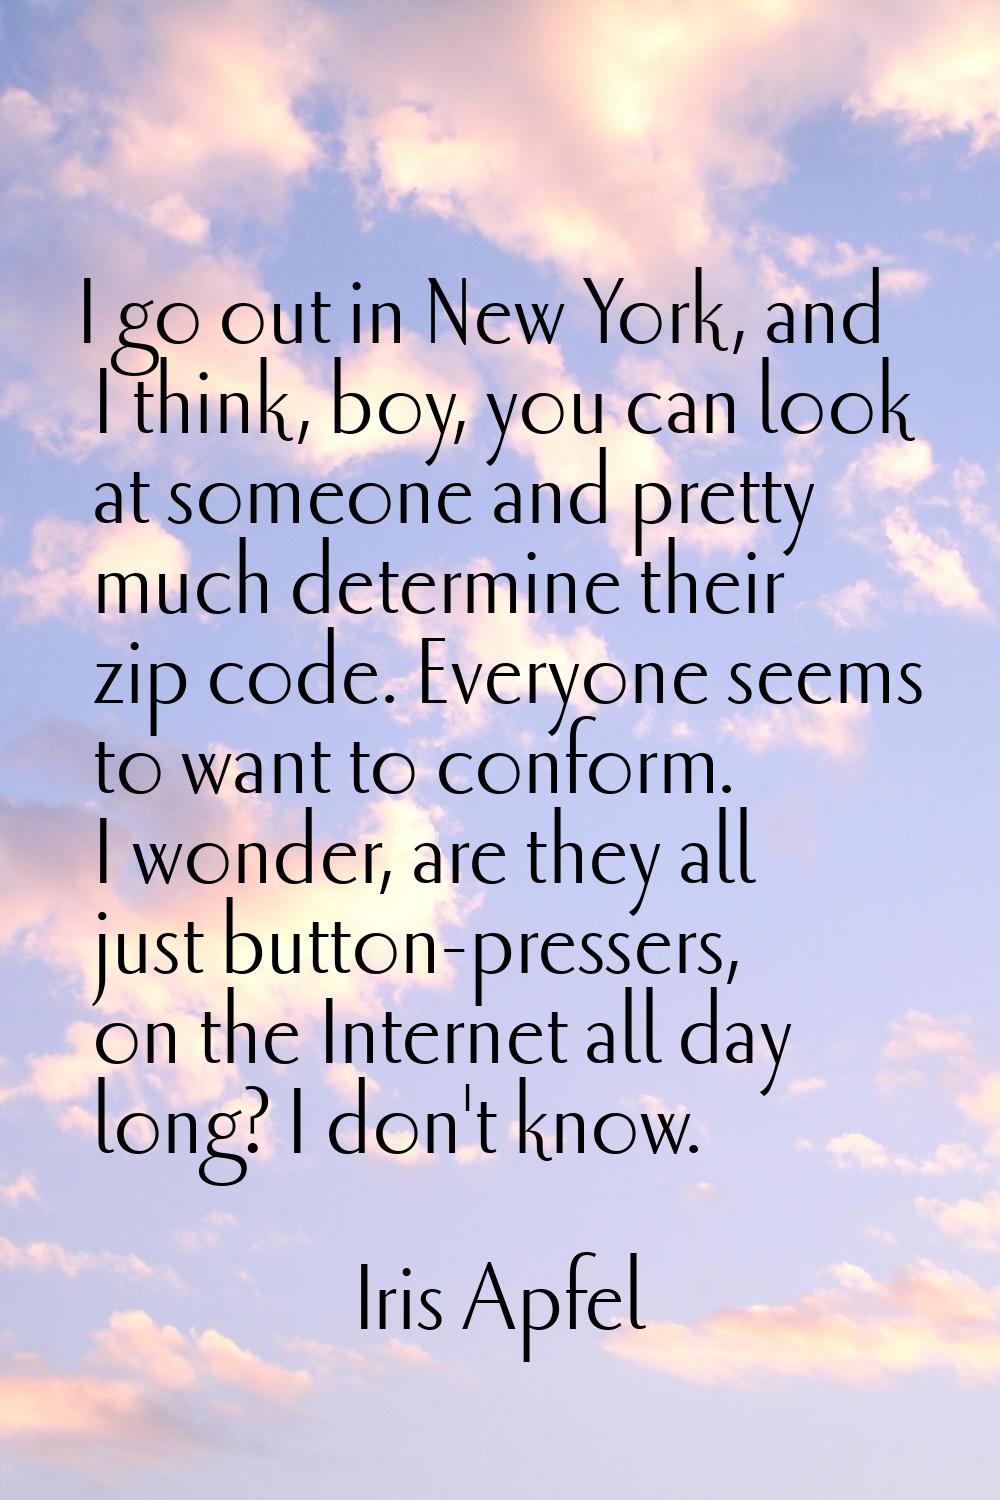 I go out in New York, and I think, boy, you can look at someone and pretty much determine their zip